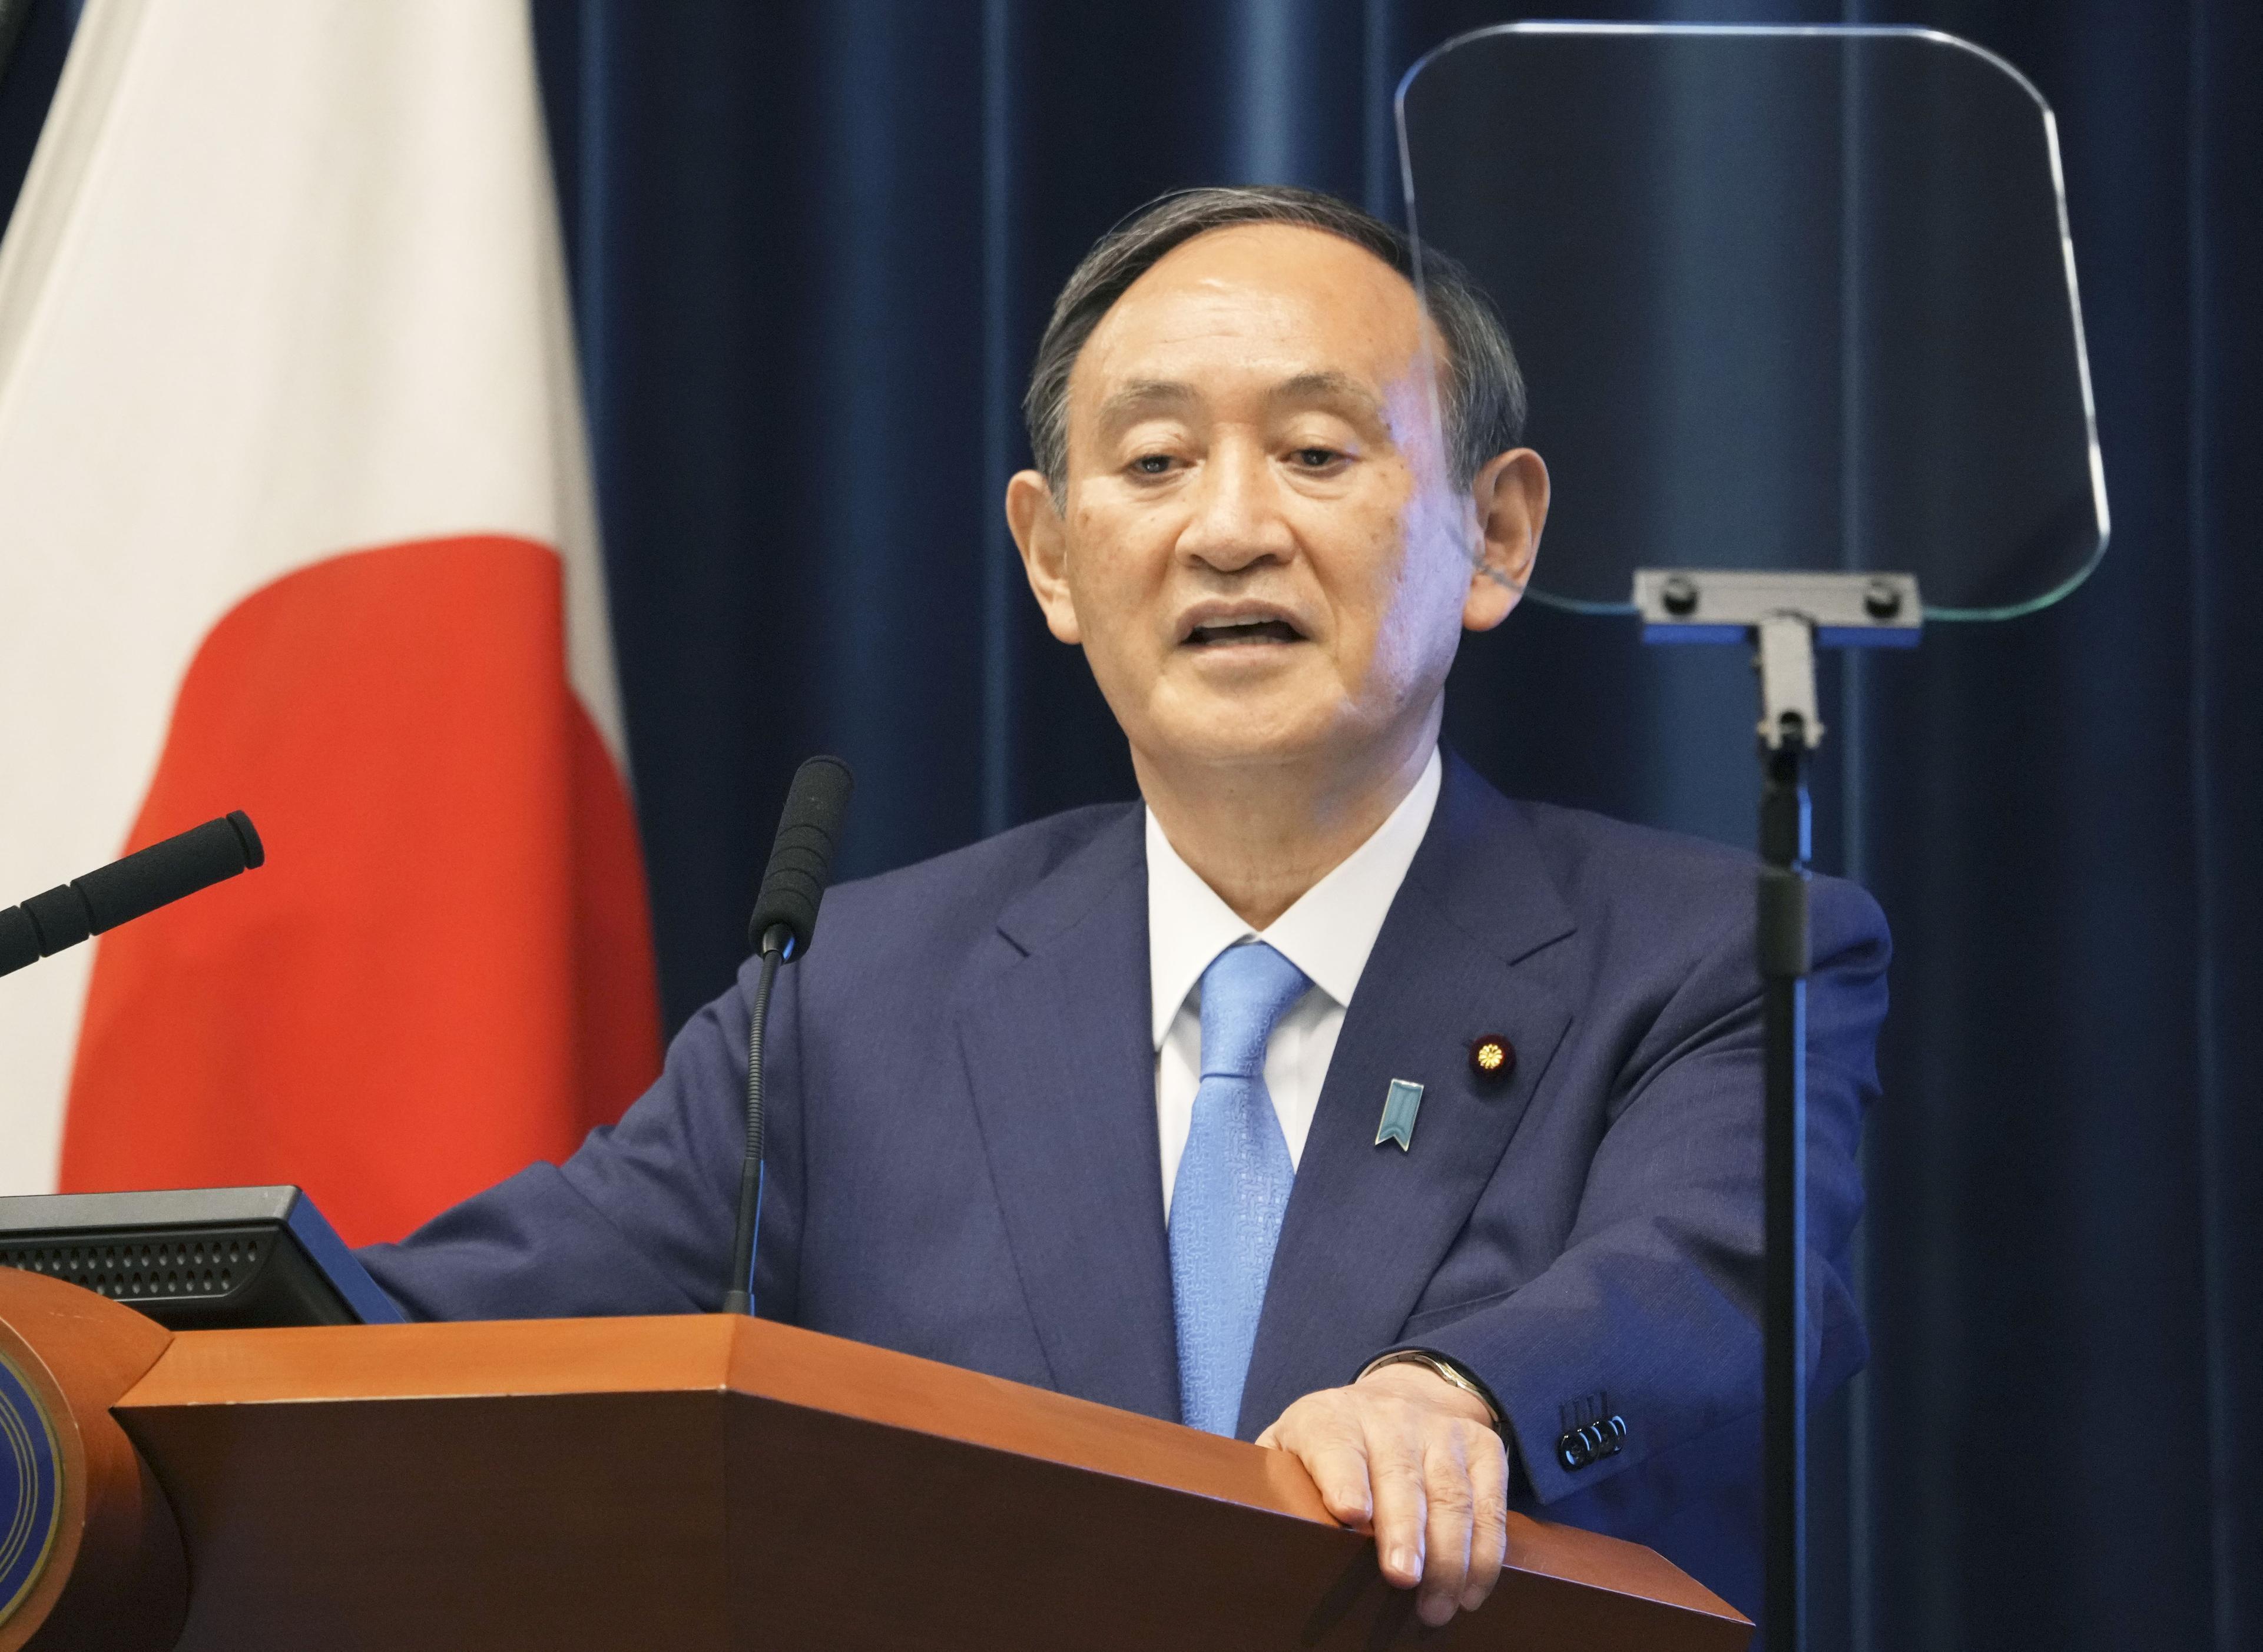 Japan is to lift the state of emergency for nine prefectures as the Olympic Games approach.